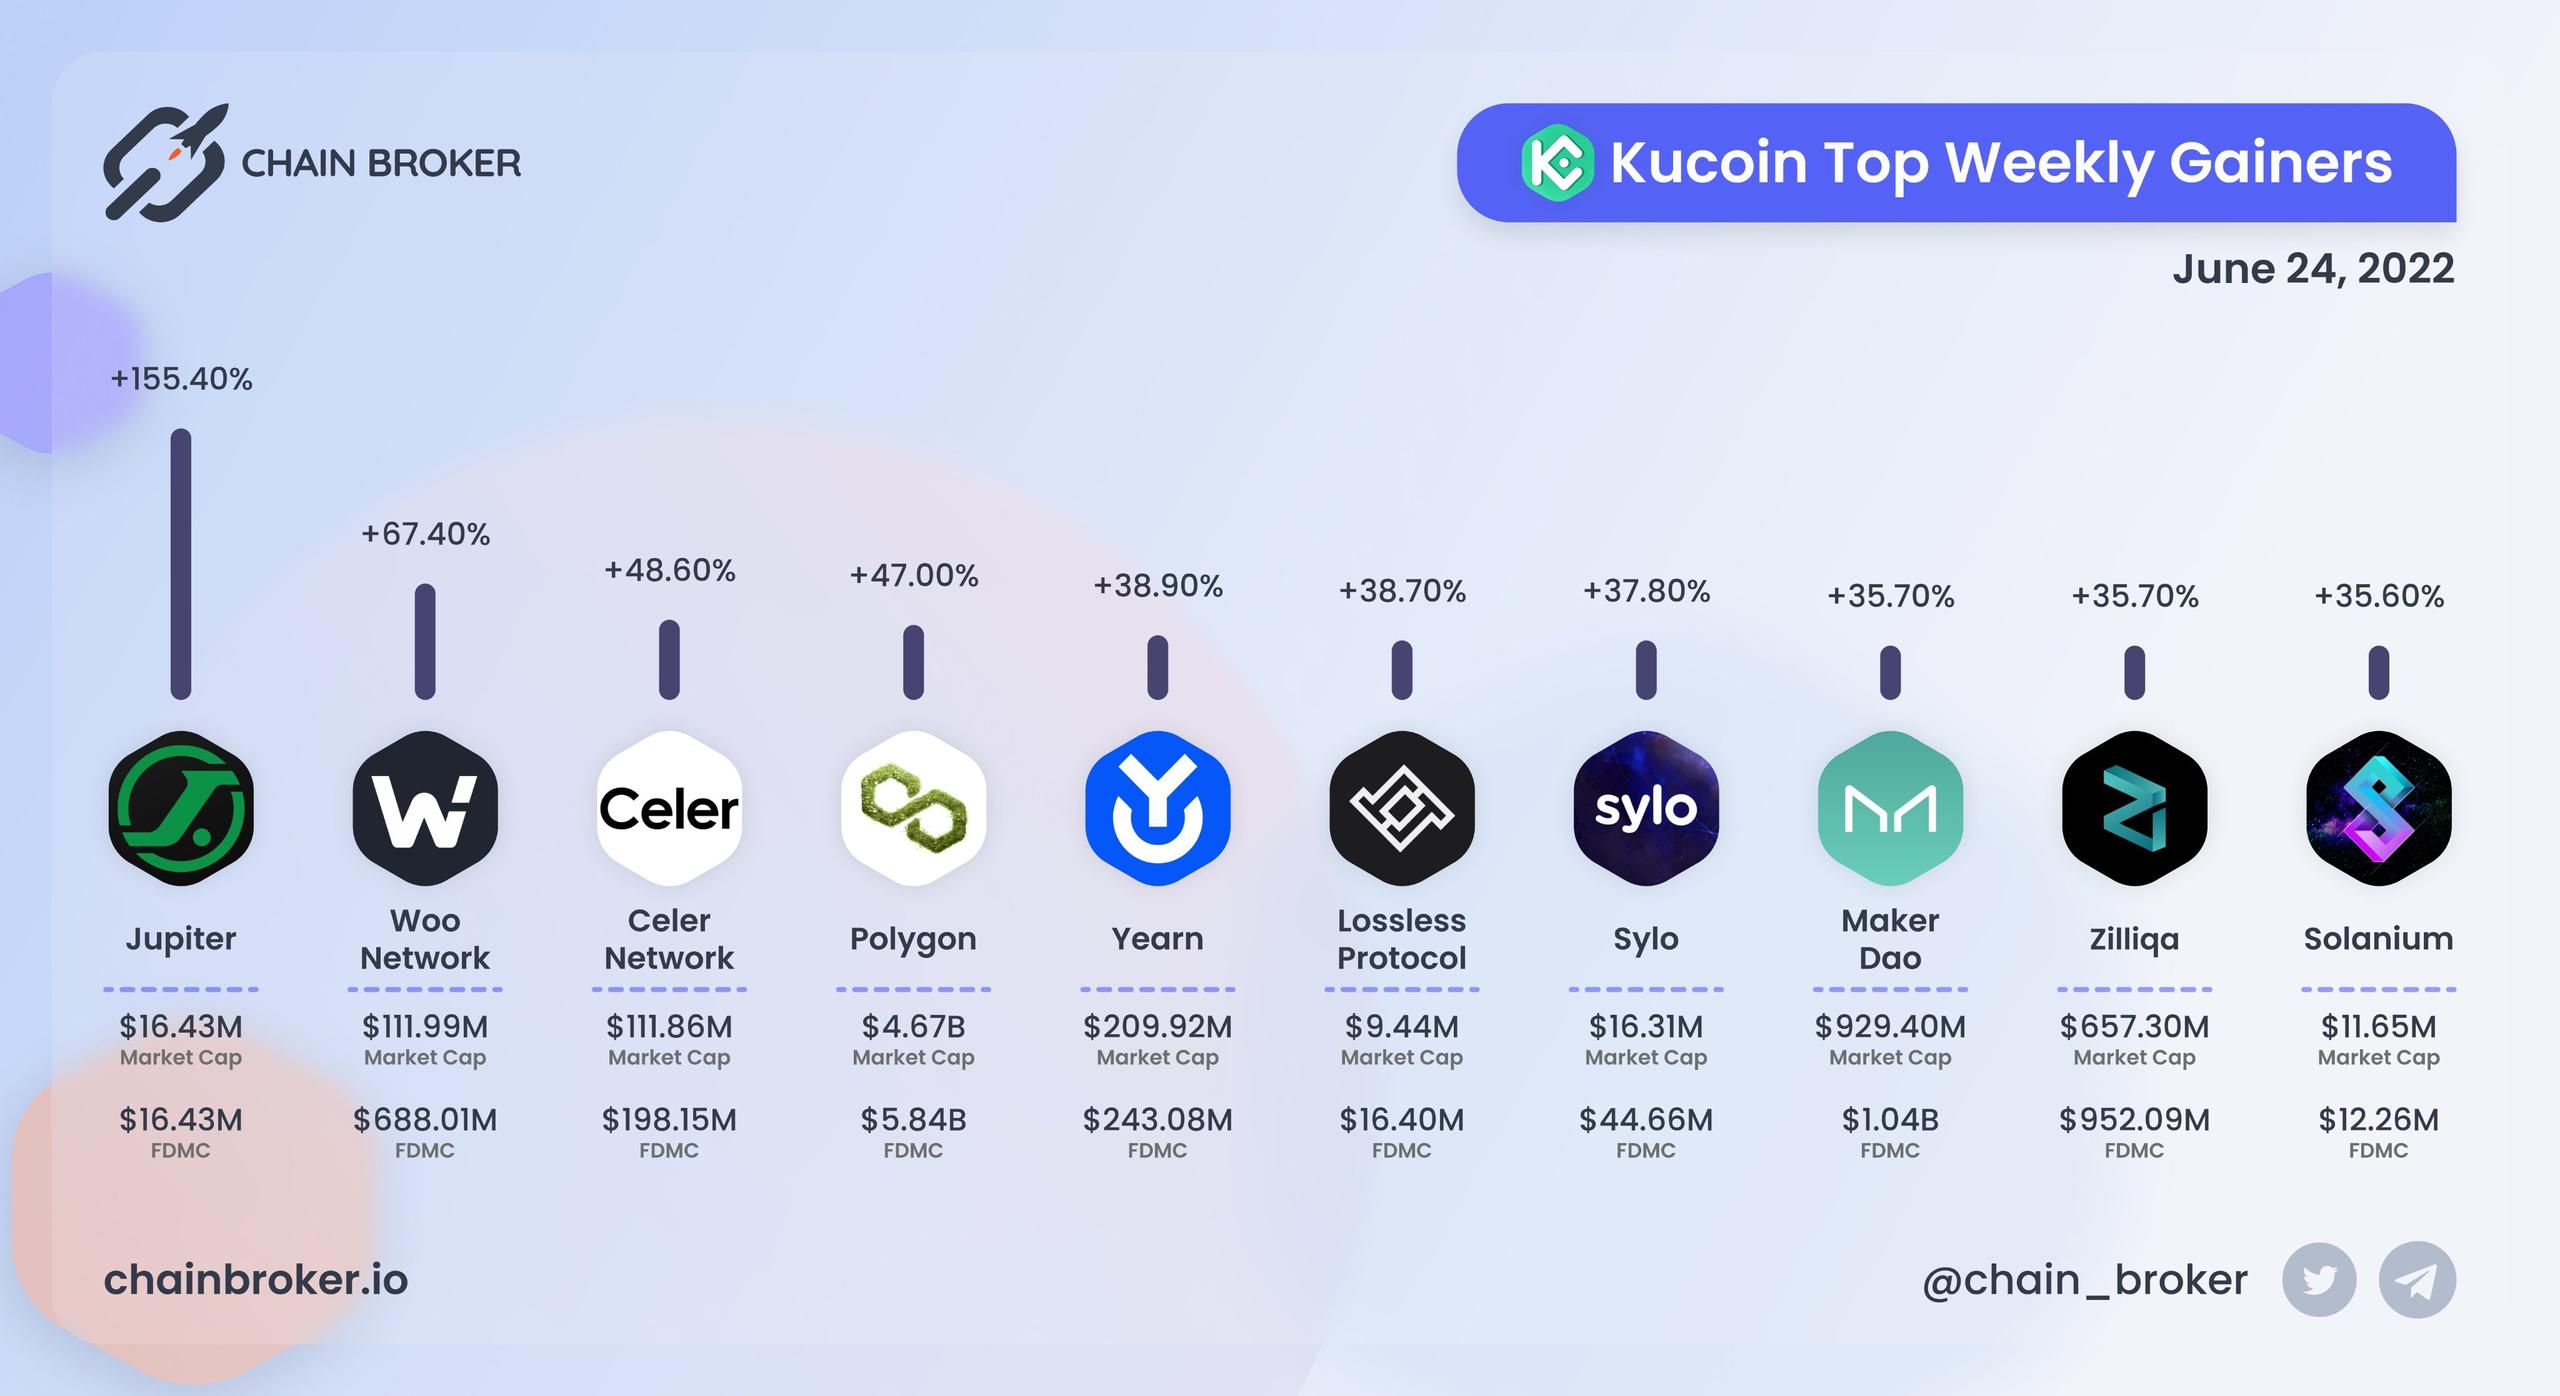 Kucoin top weekly gainers